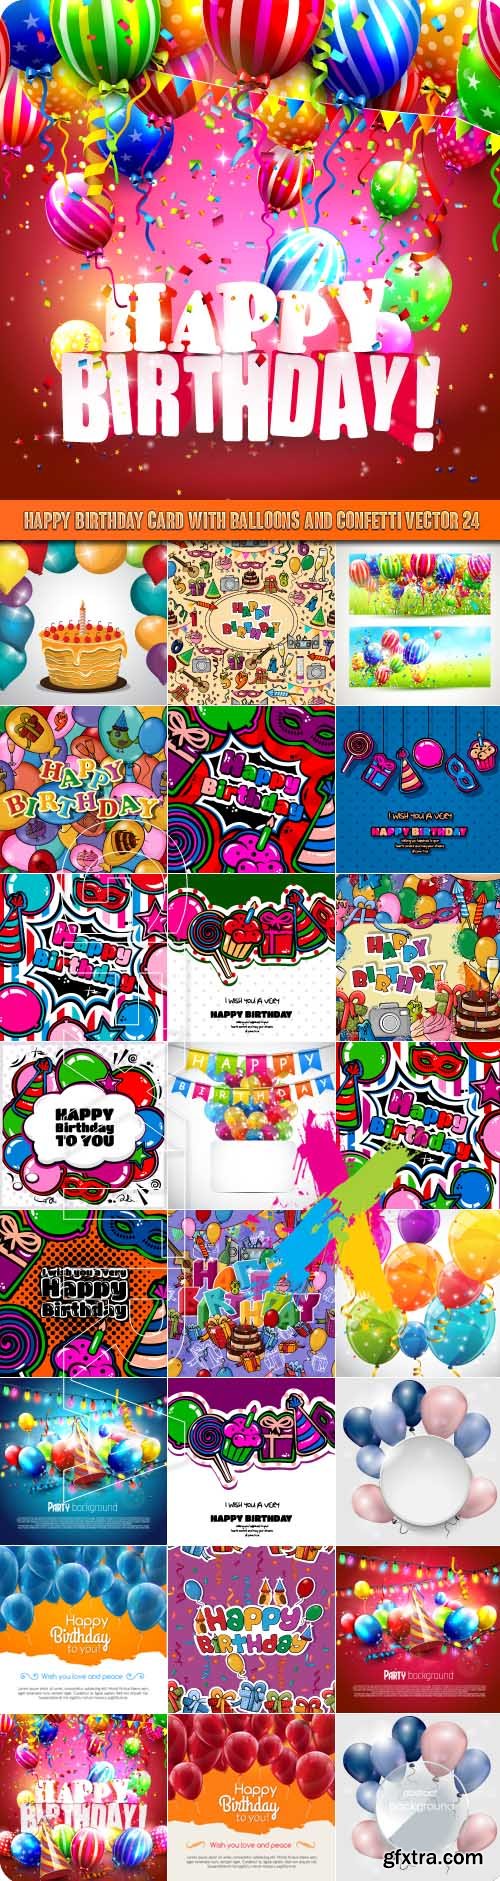 Happy Birthday card with balloons and confetti vector 24